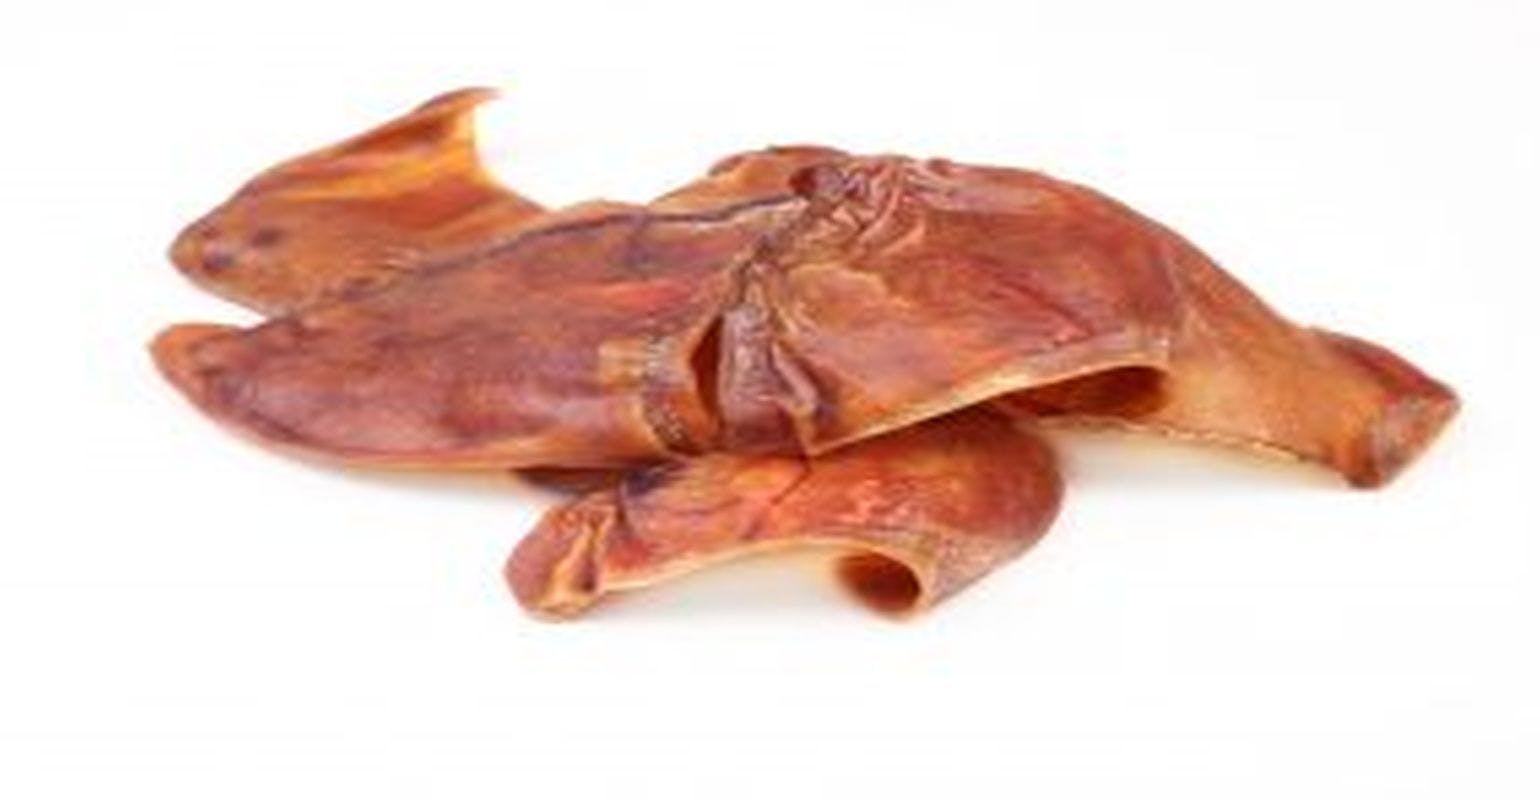 Outbreak of Multidrug-Resistant Salmonella Infections Linked to Contact with Pig Ear Dog Treats